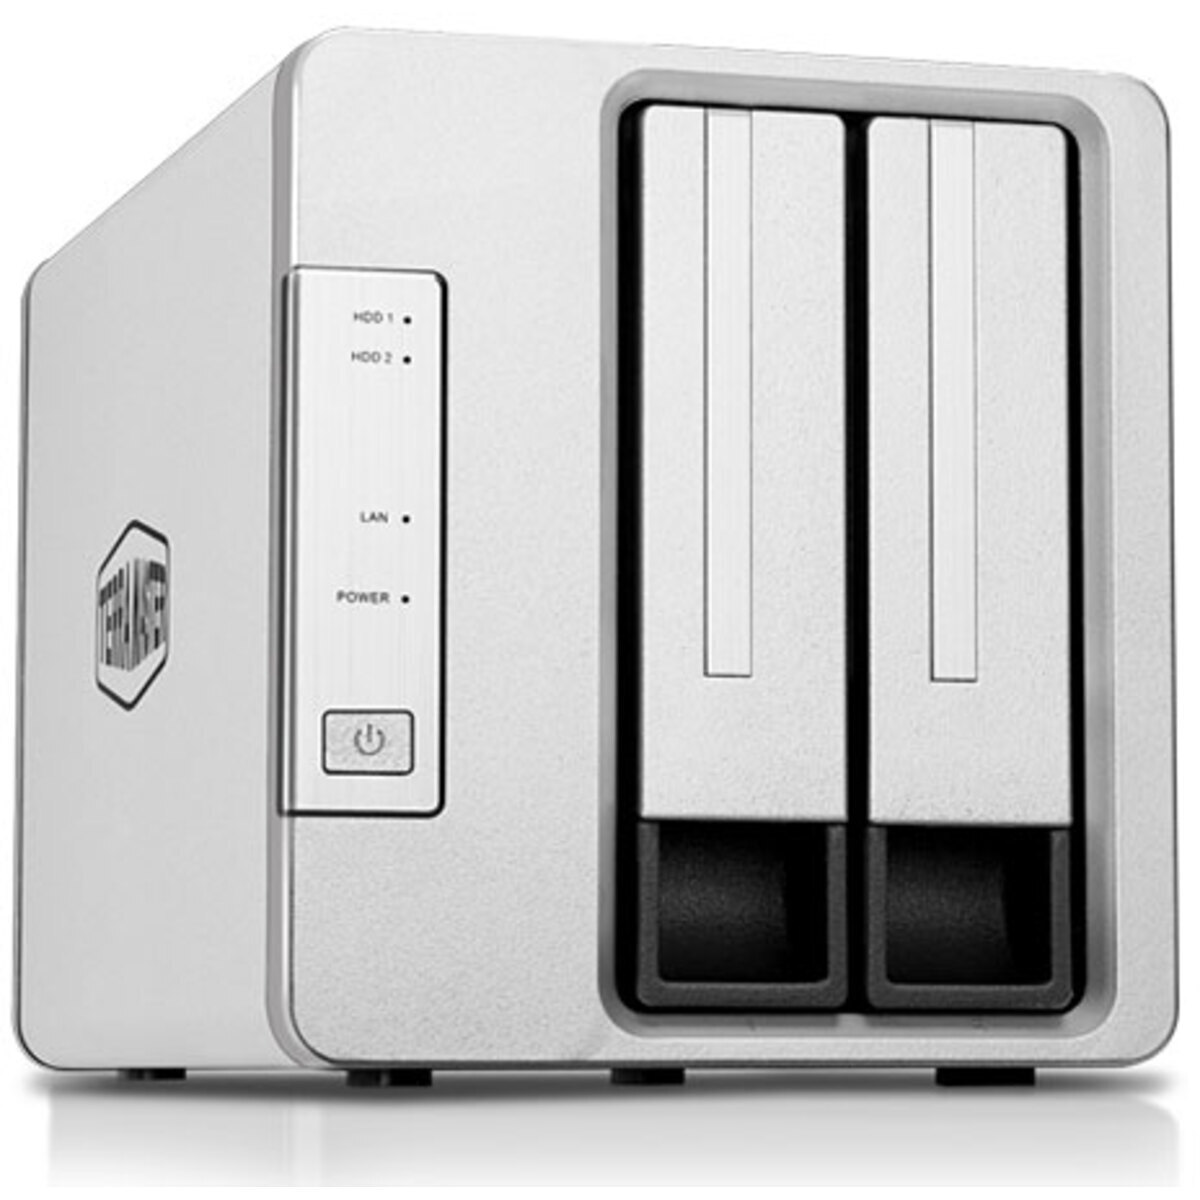 TerraMaster F2-223 NAS - Network Attached Storage Device Burn-In Tested Configurations - FREE RAM UPGRADE